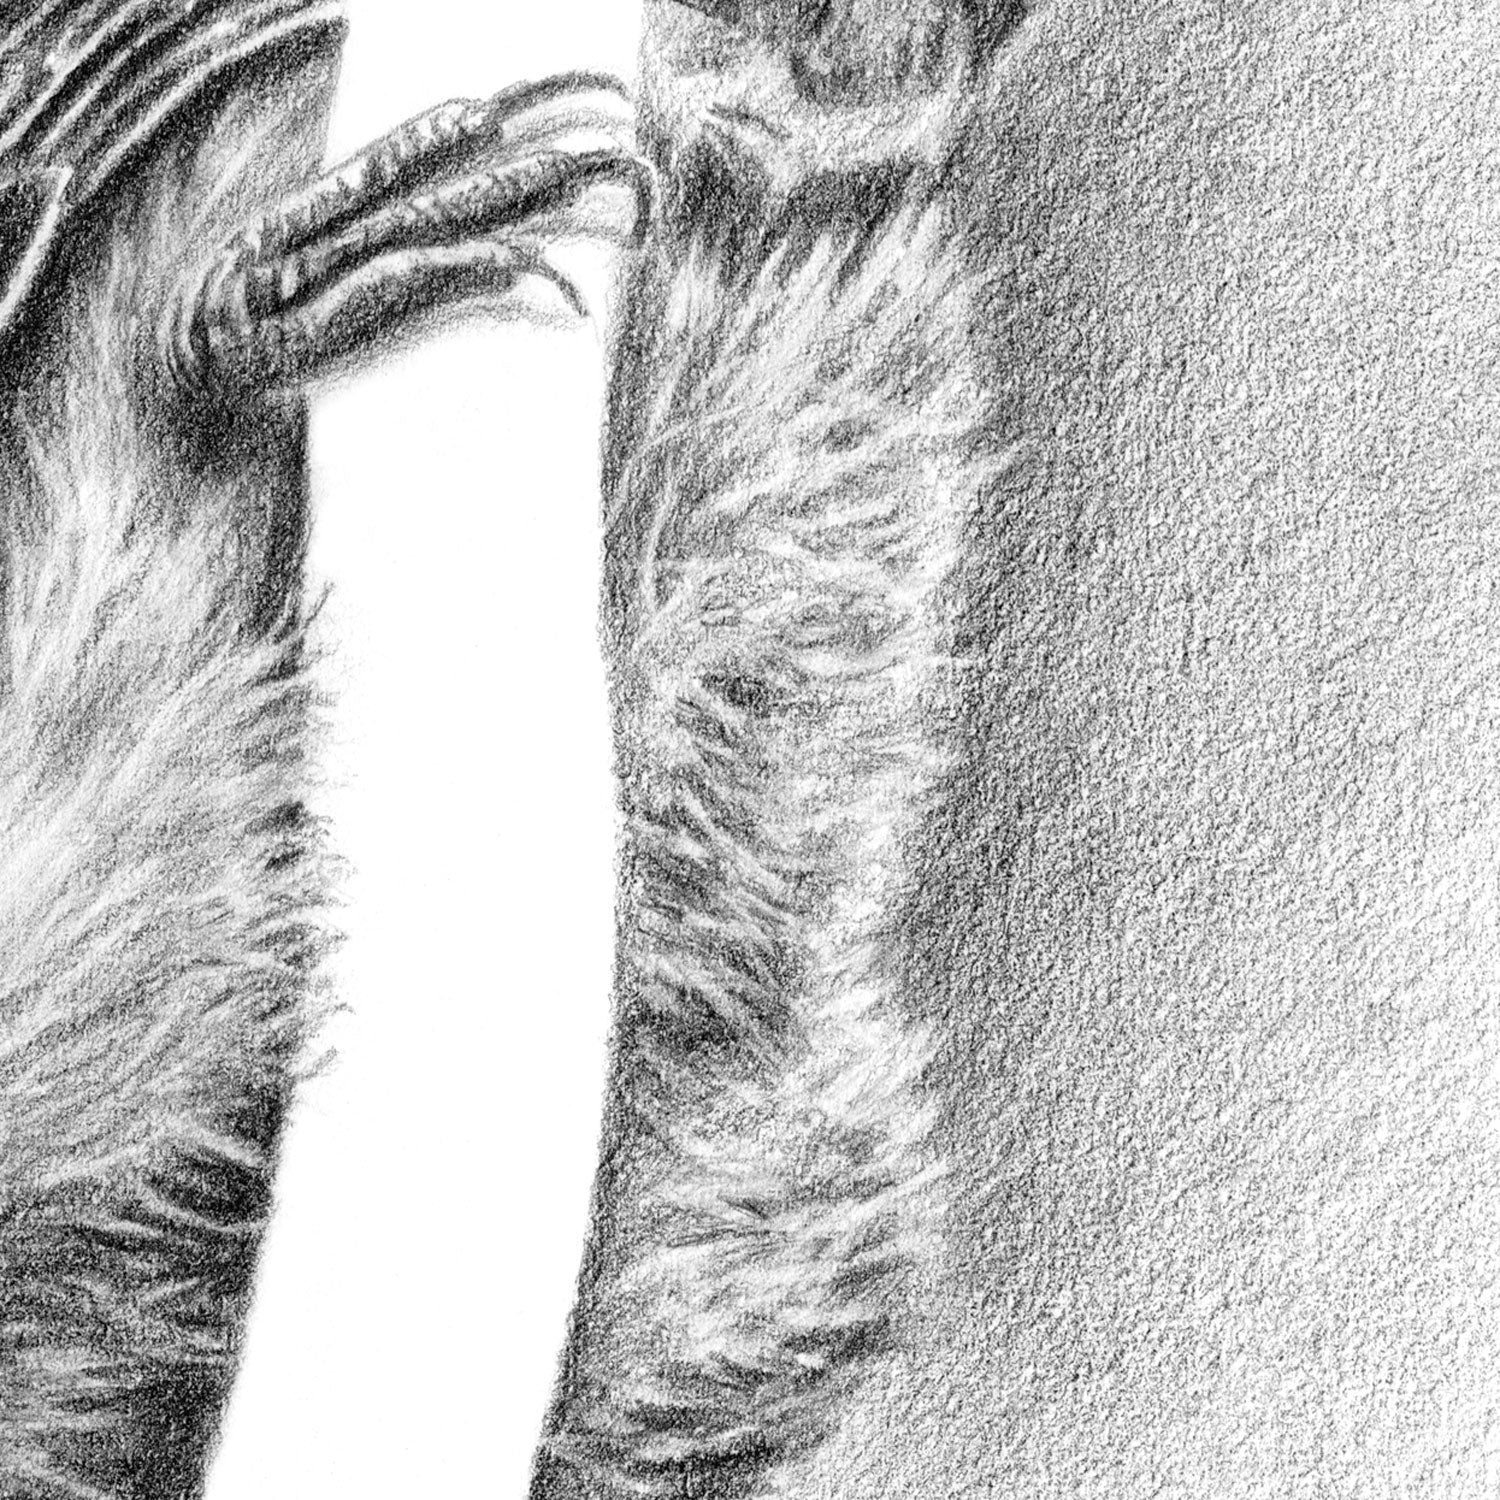 Original Nuthatch Pencil Drawing Free Uk Shipping — Thethrivingwild 